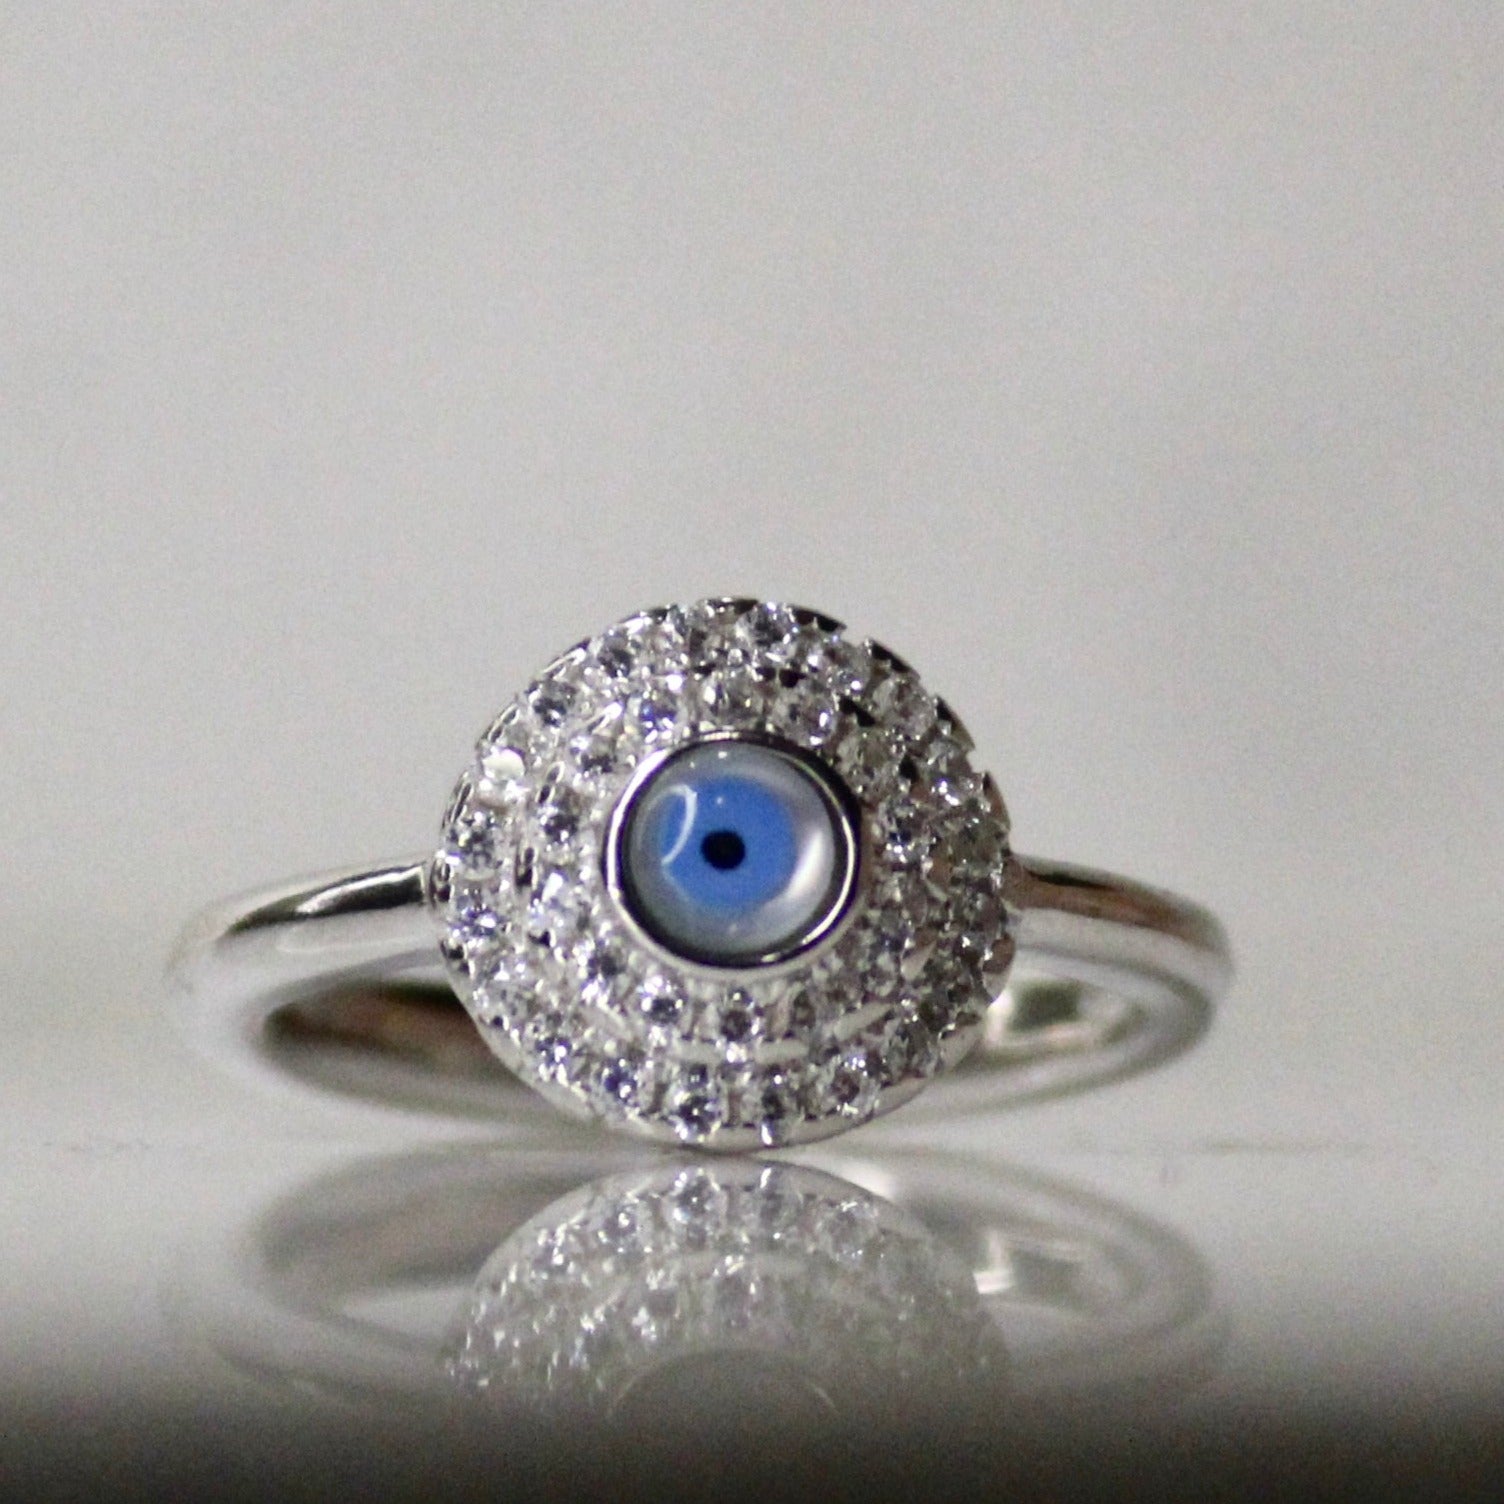 Buy Sterling Silver Simple Eye Ring, Silver Ring, Evil Eye Ring, Protector  Ring Online in India - Etsy